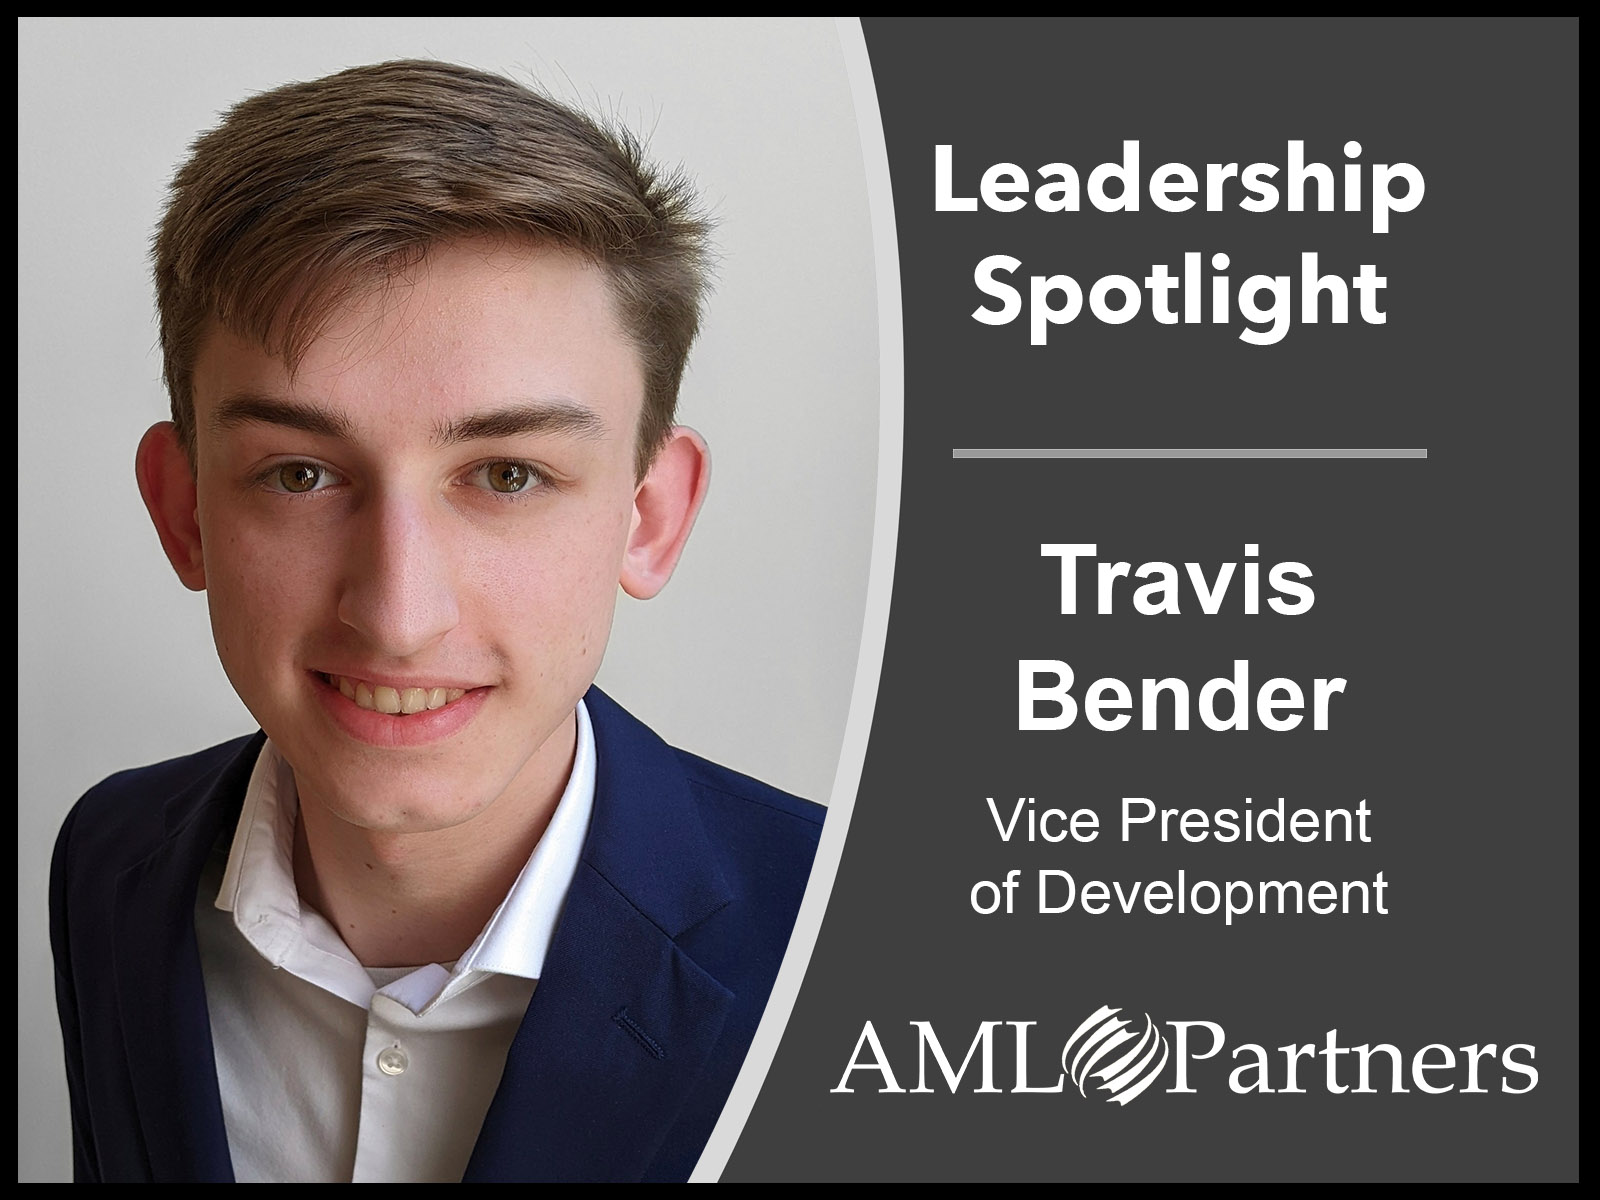 RegTech innovation in the today's leadership spotlight. Art shows a Portrait in a frame with text: Travis Bender, Vice President of Development at AML Partners. AML Partners: AML software, AML solutions, KYC software, KYC solutions, AML Compliance software and solutions for financial institutions.